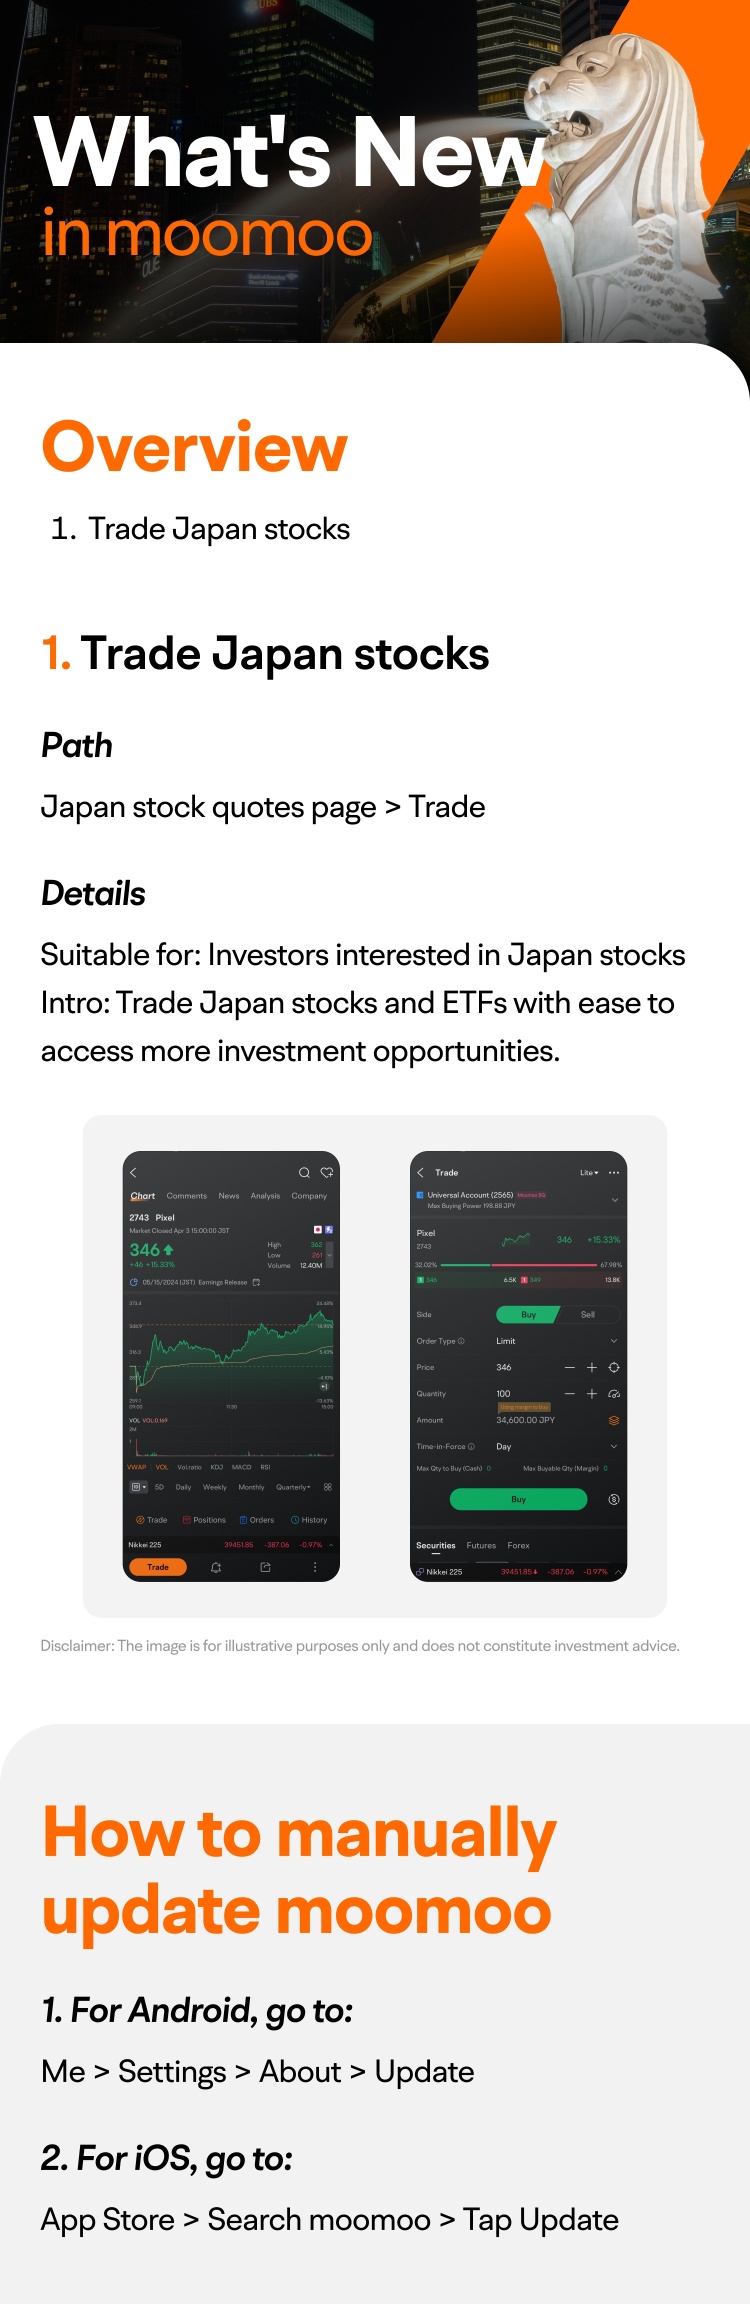 What's New: Japan stock trading is available in Singapore now!